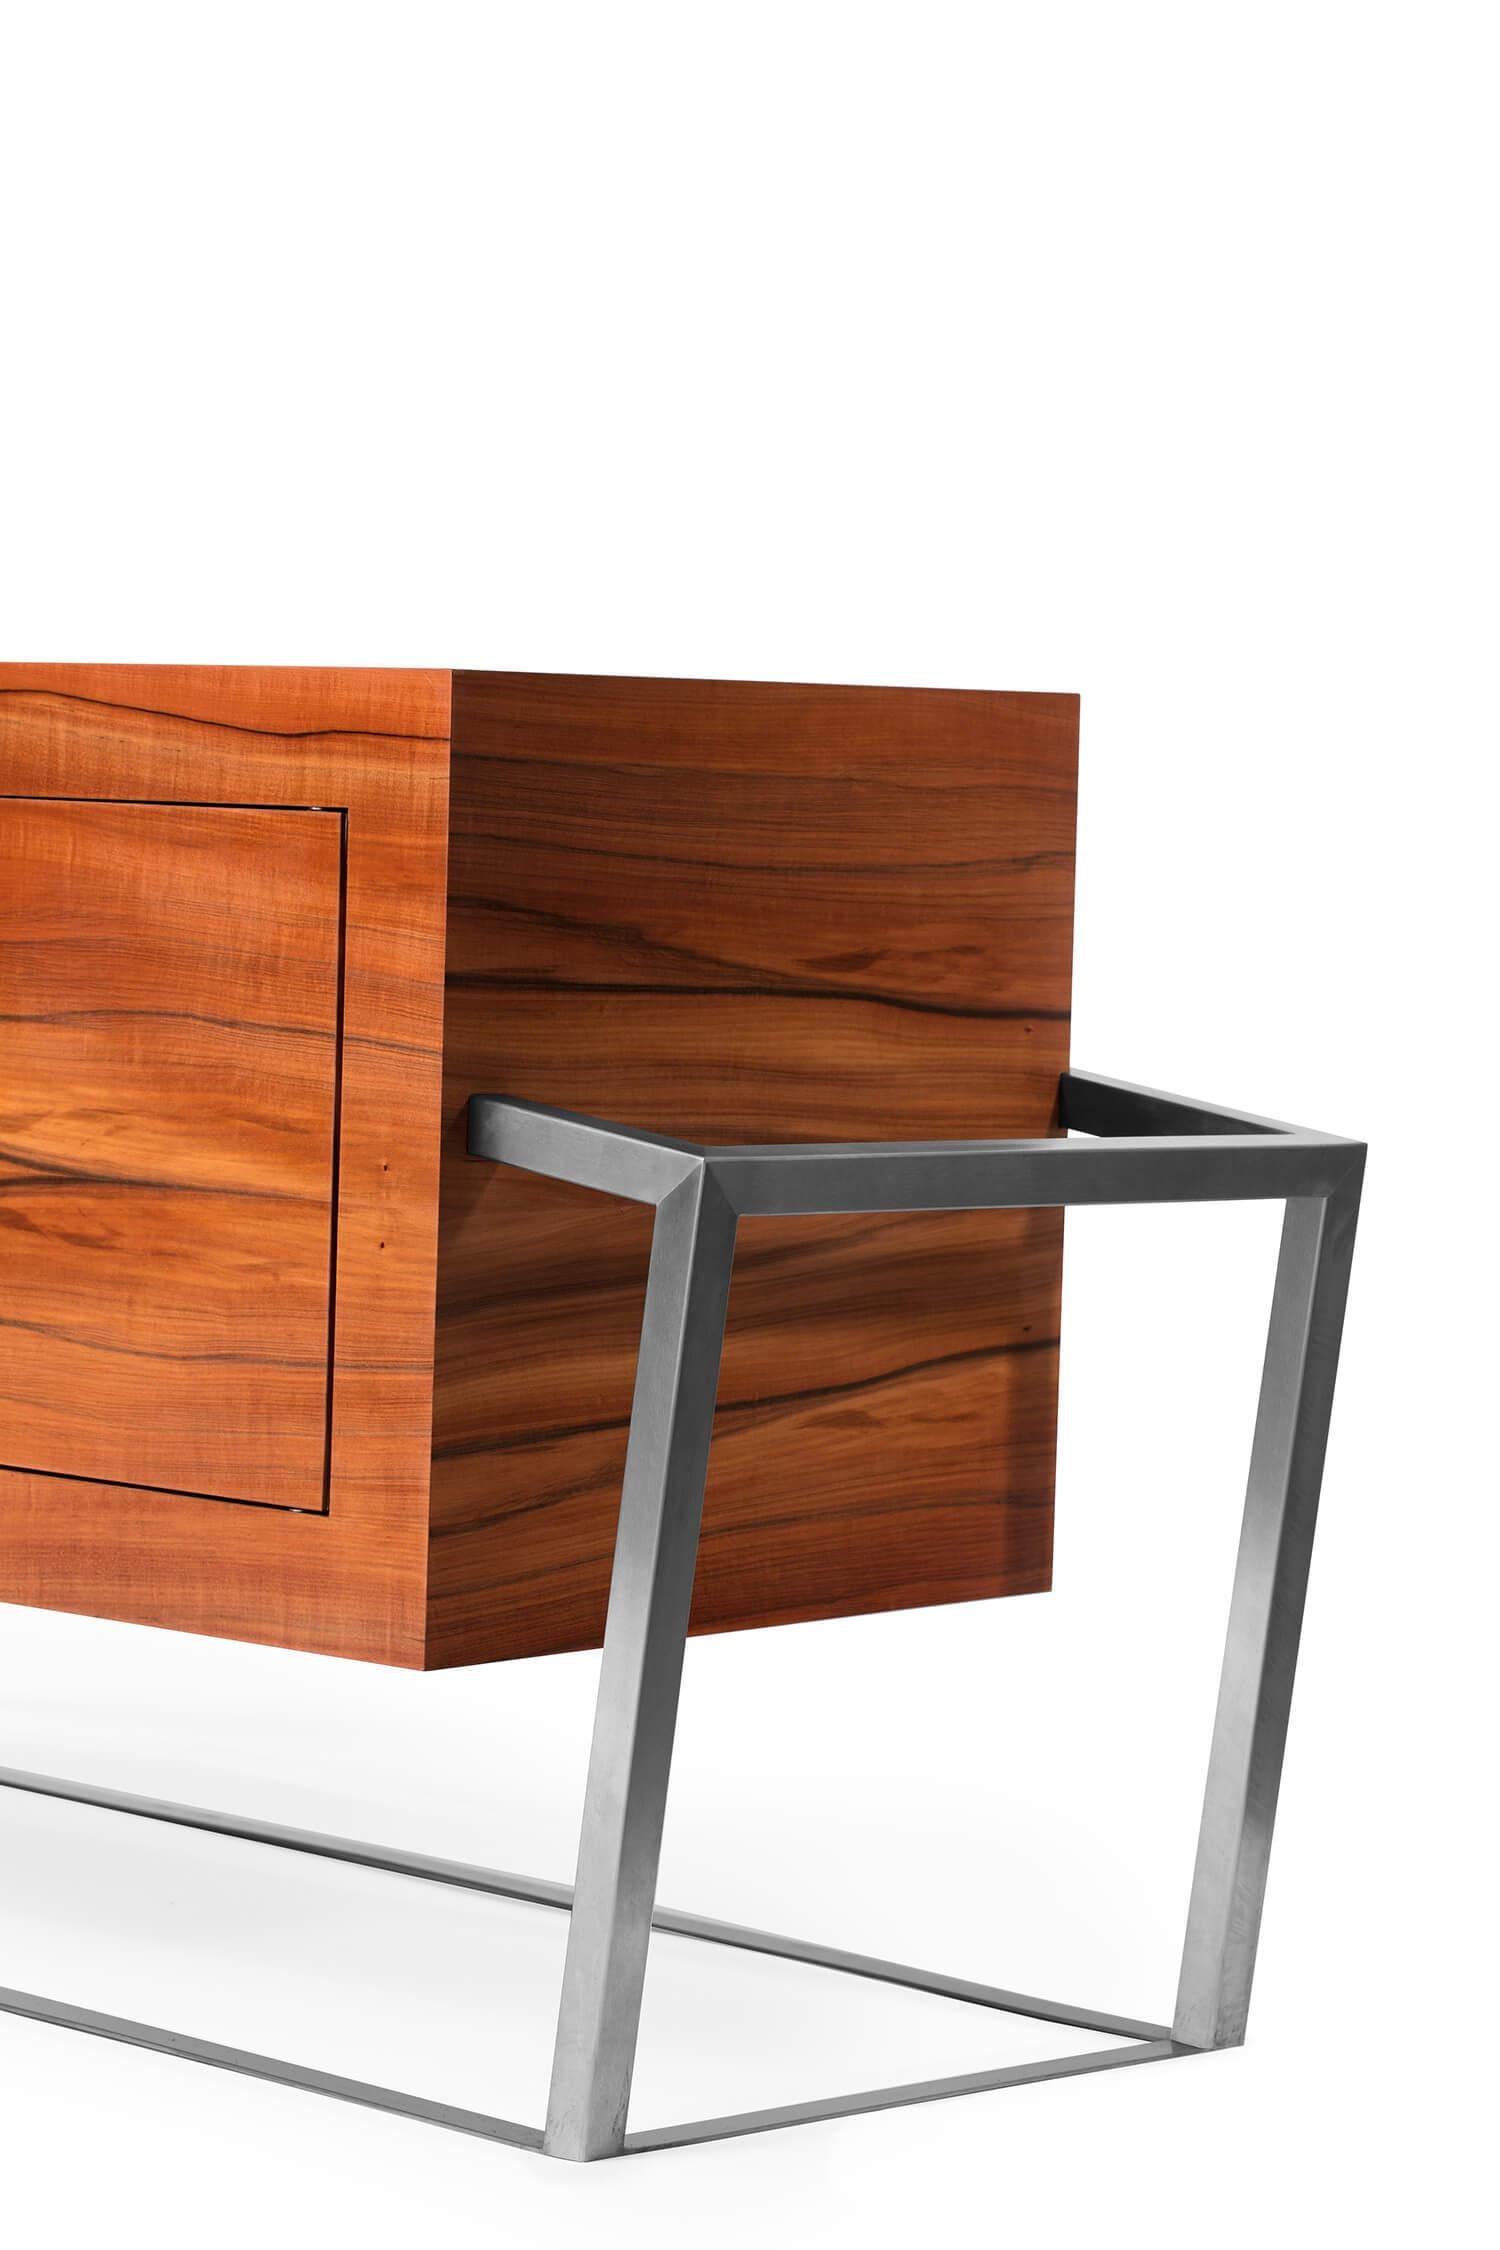 Cut Steel Modern Accent Credenza Sideboard in Tineo Wood and Brushed Stainless Steel For Sale